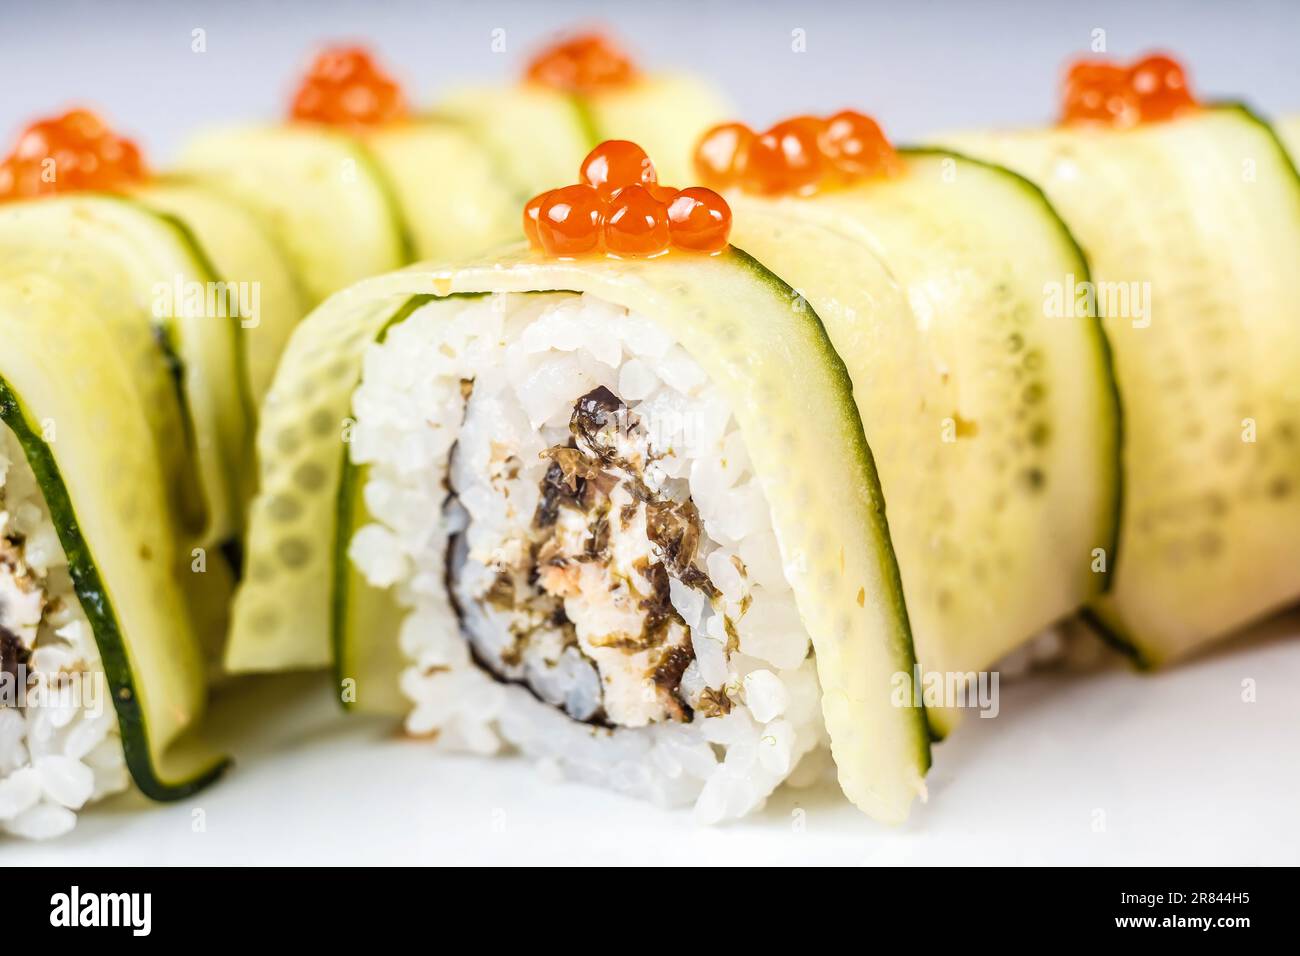 A colorful California roll, full of fresh produce and seafood such as cucumber and red caviar for a healthy yet delicious sushi dish. Stock Photo